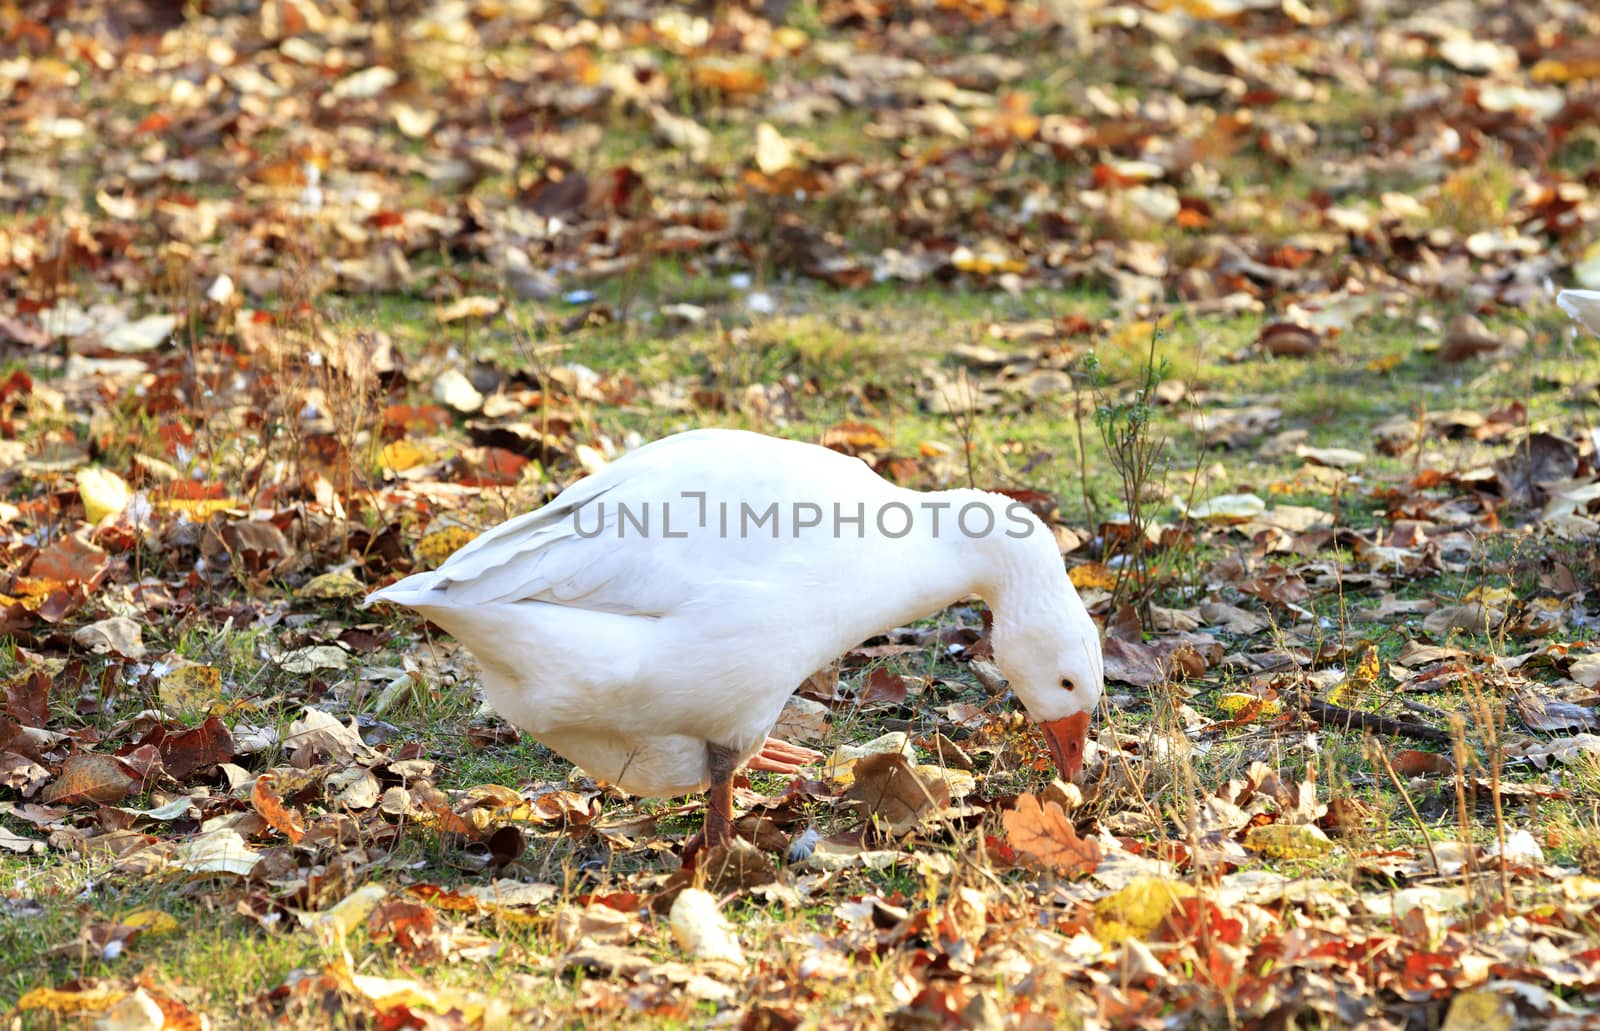 White goose grazes in a clearing among the fallen leaves in the autumn garden. by Sergii